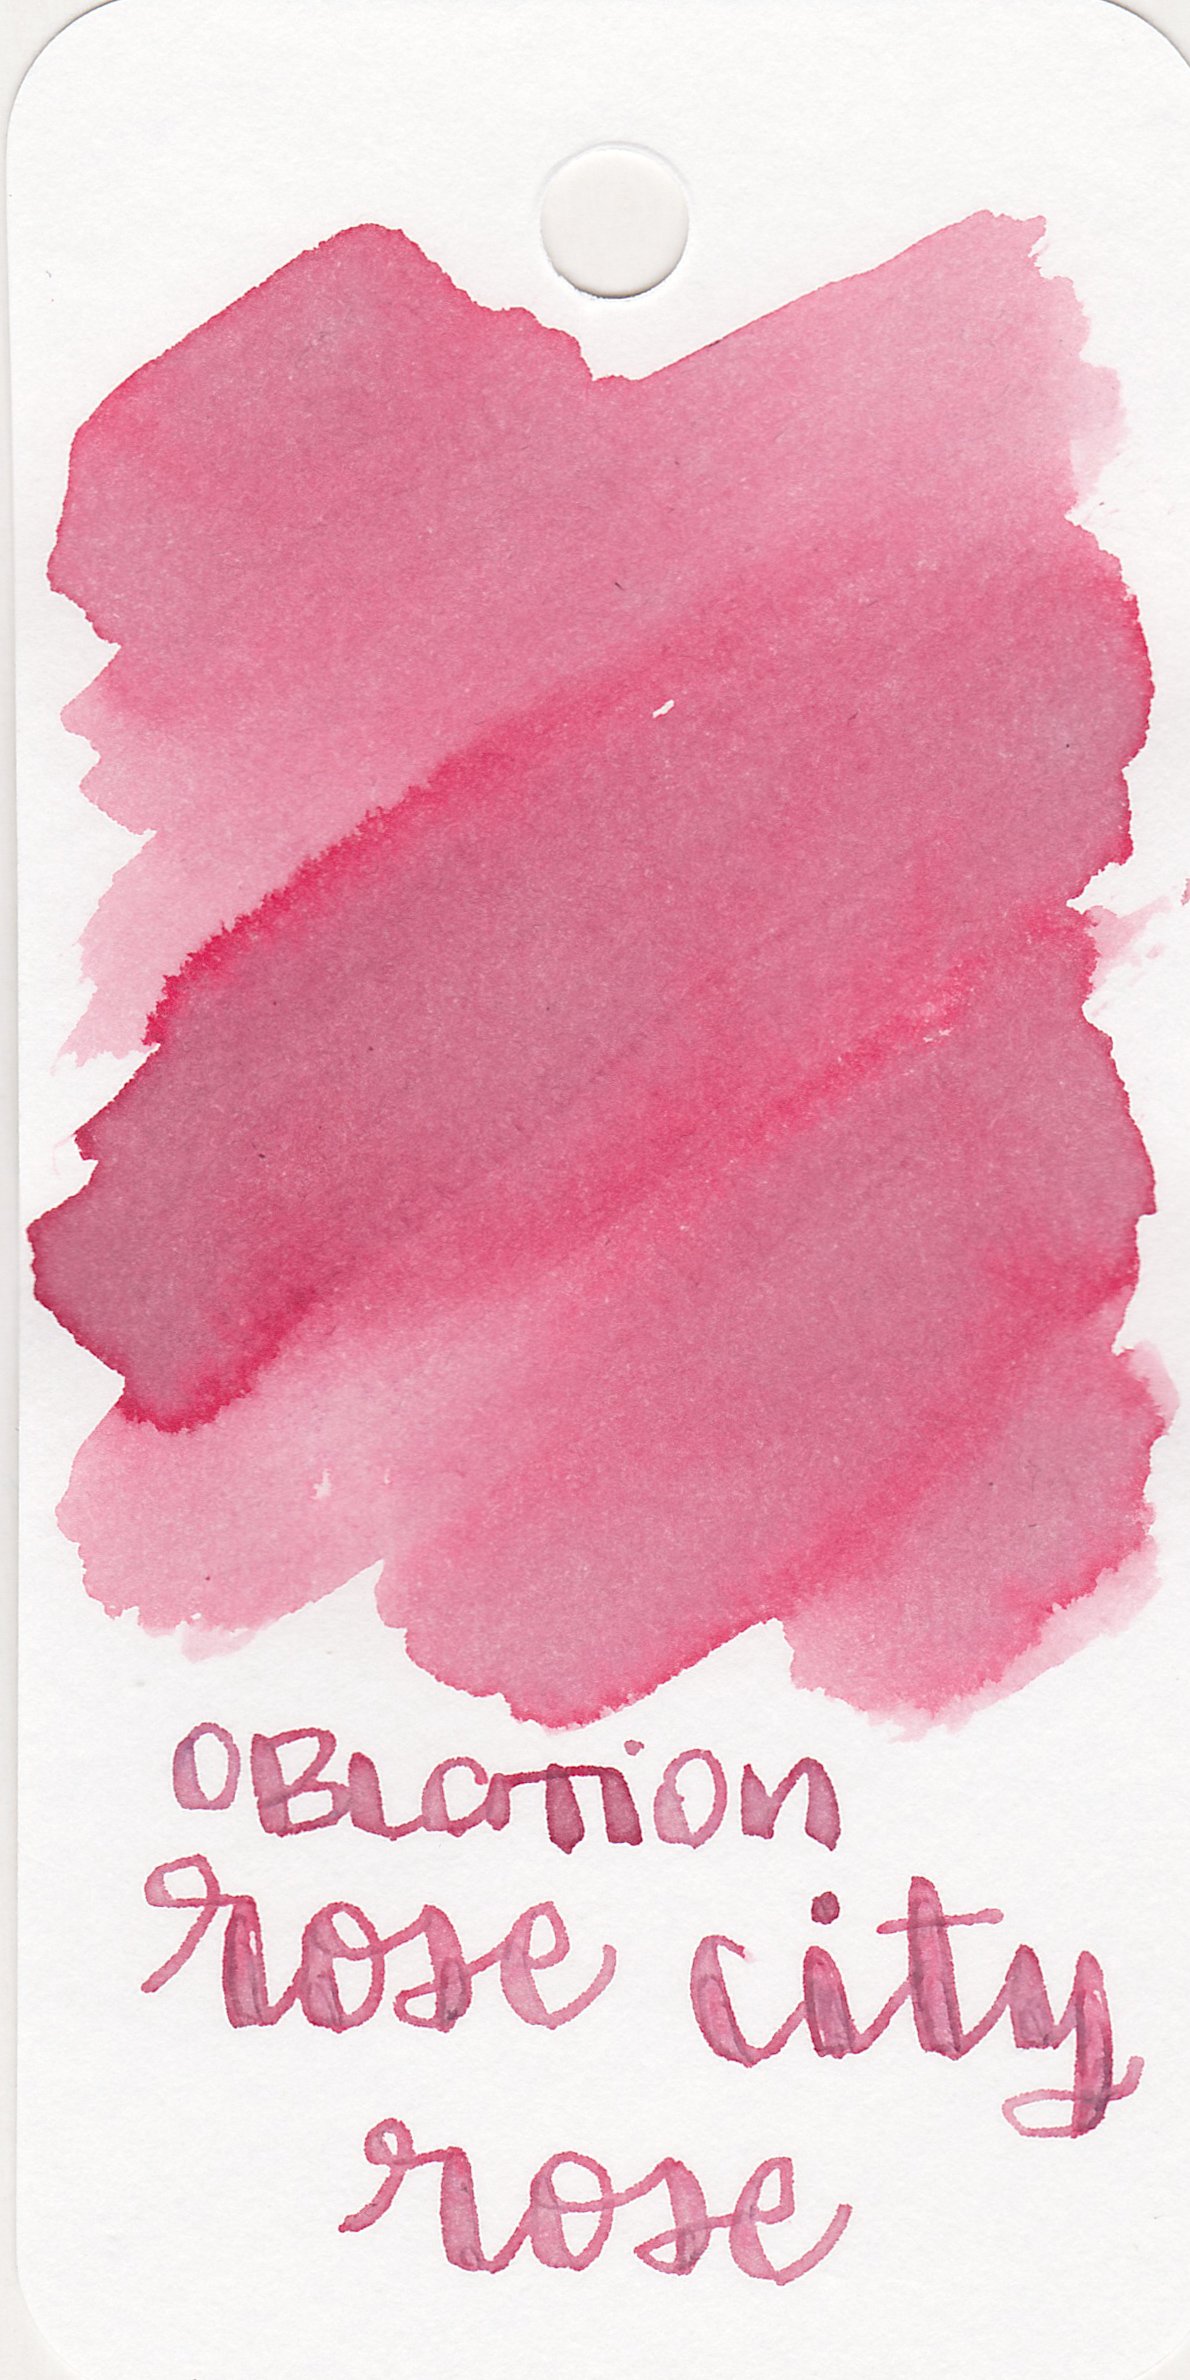 Ink Review #2243: Oblation Rose City Rose — Mountain of Ink